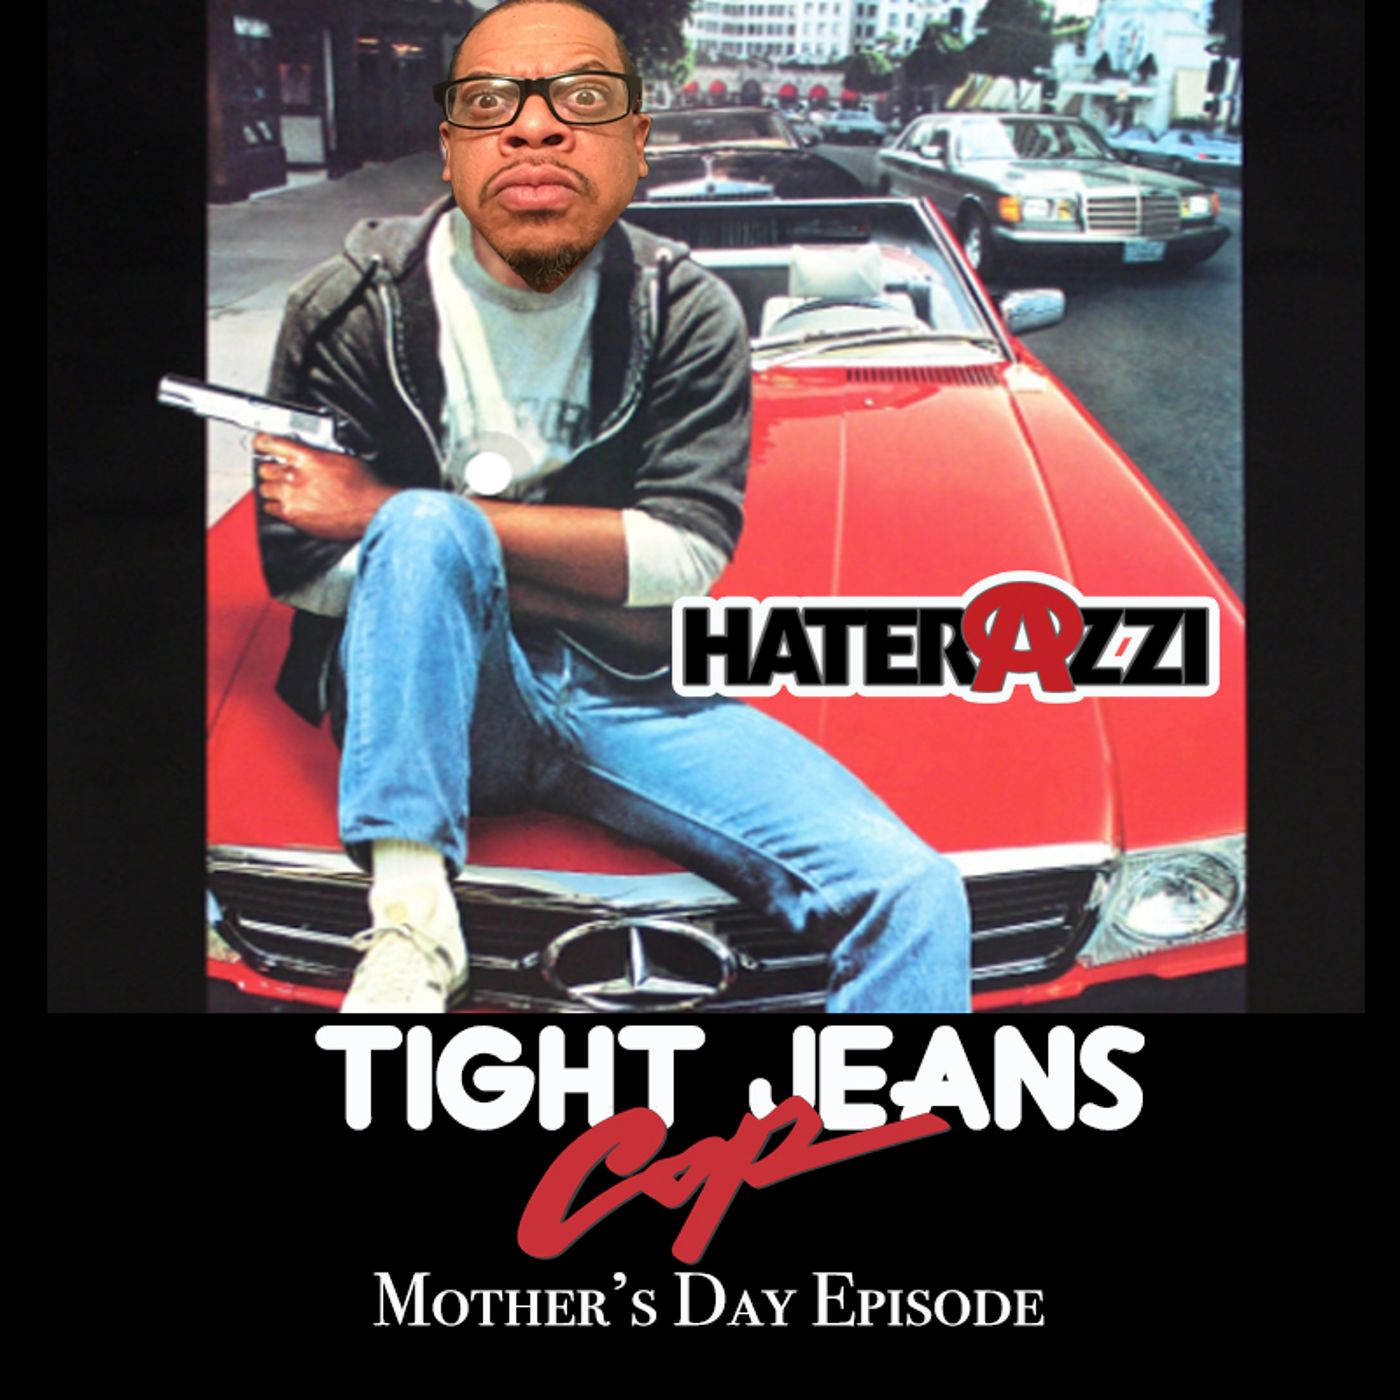 Tight Jeans Cop: Mother's Day Episode